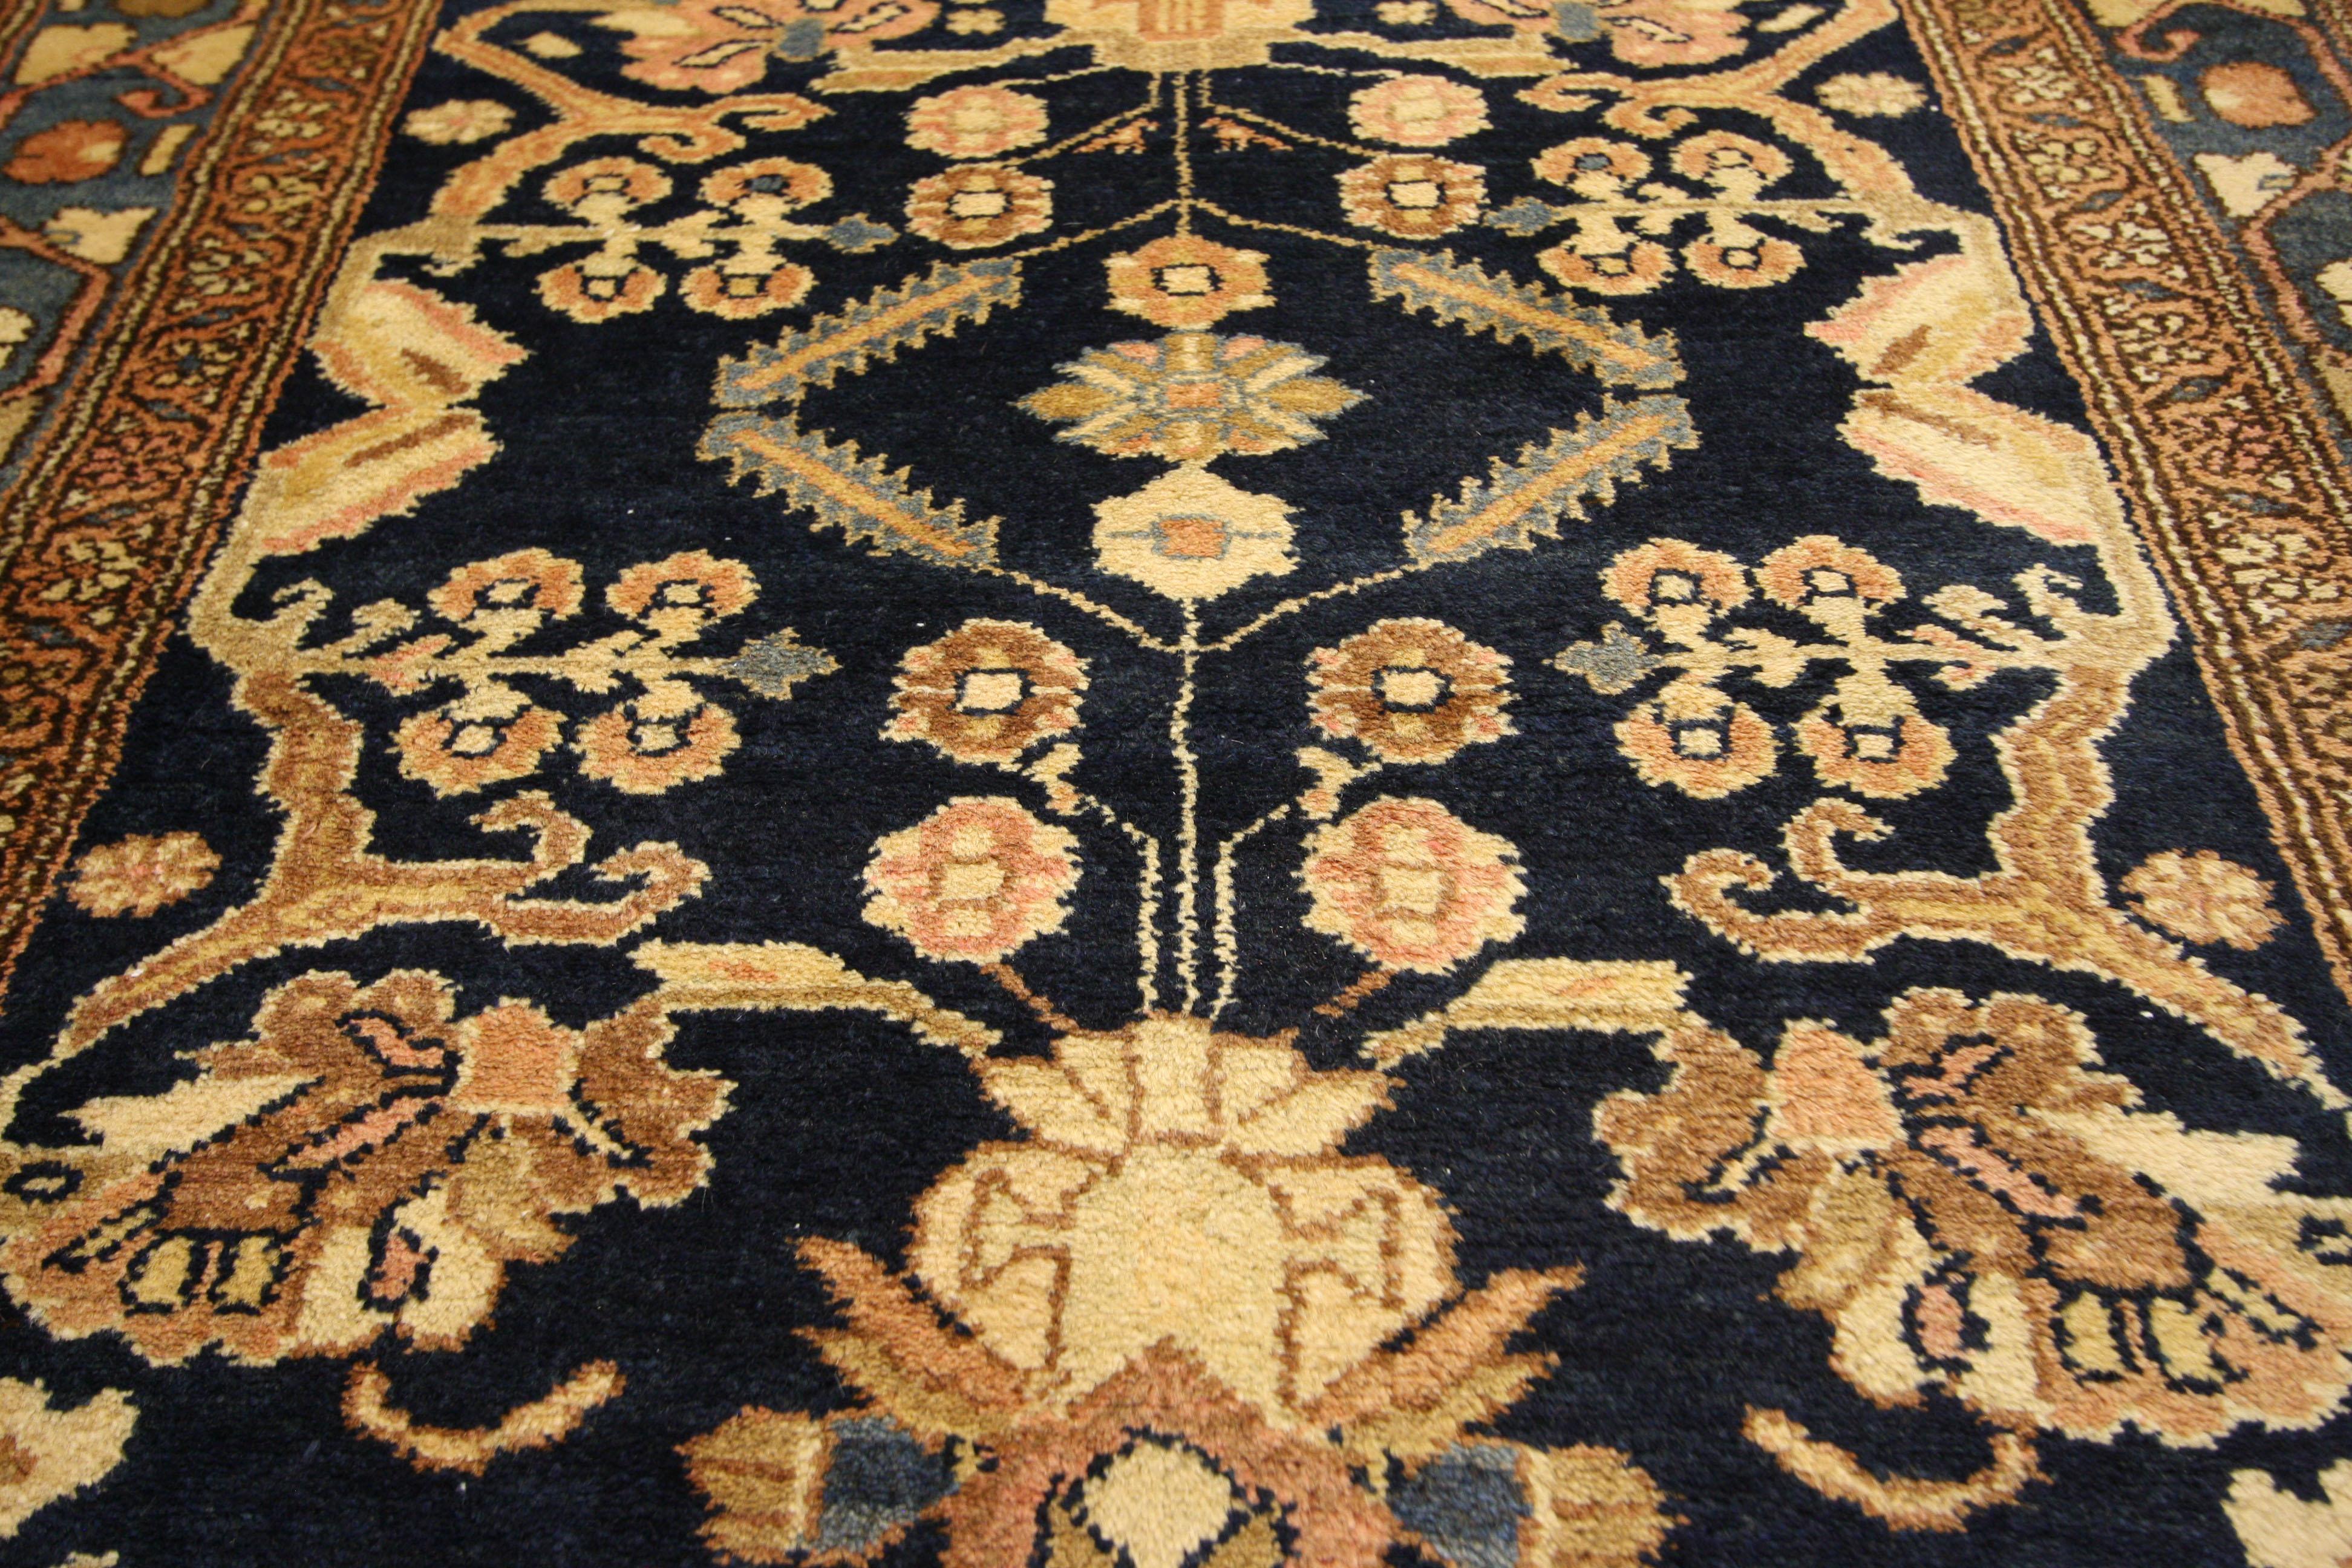 73245 Antique Navy Blue Persian Hamadan Rug Runner, 03'08 x 11'03. Persian Hamadan rugs and carpet runners trace their origins to the storied Hamadan region in Iran, renowned for its illustrious tradition of rug weaving. These meticulously